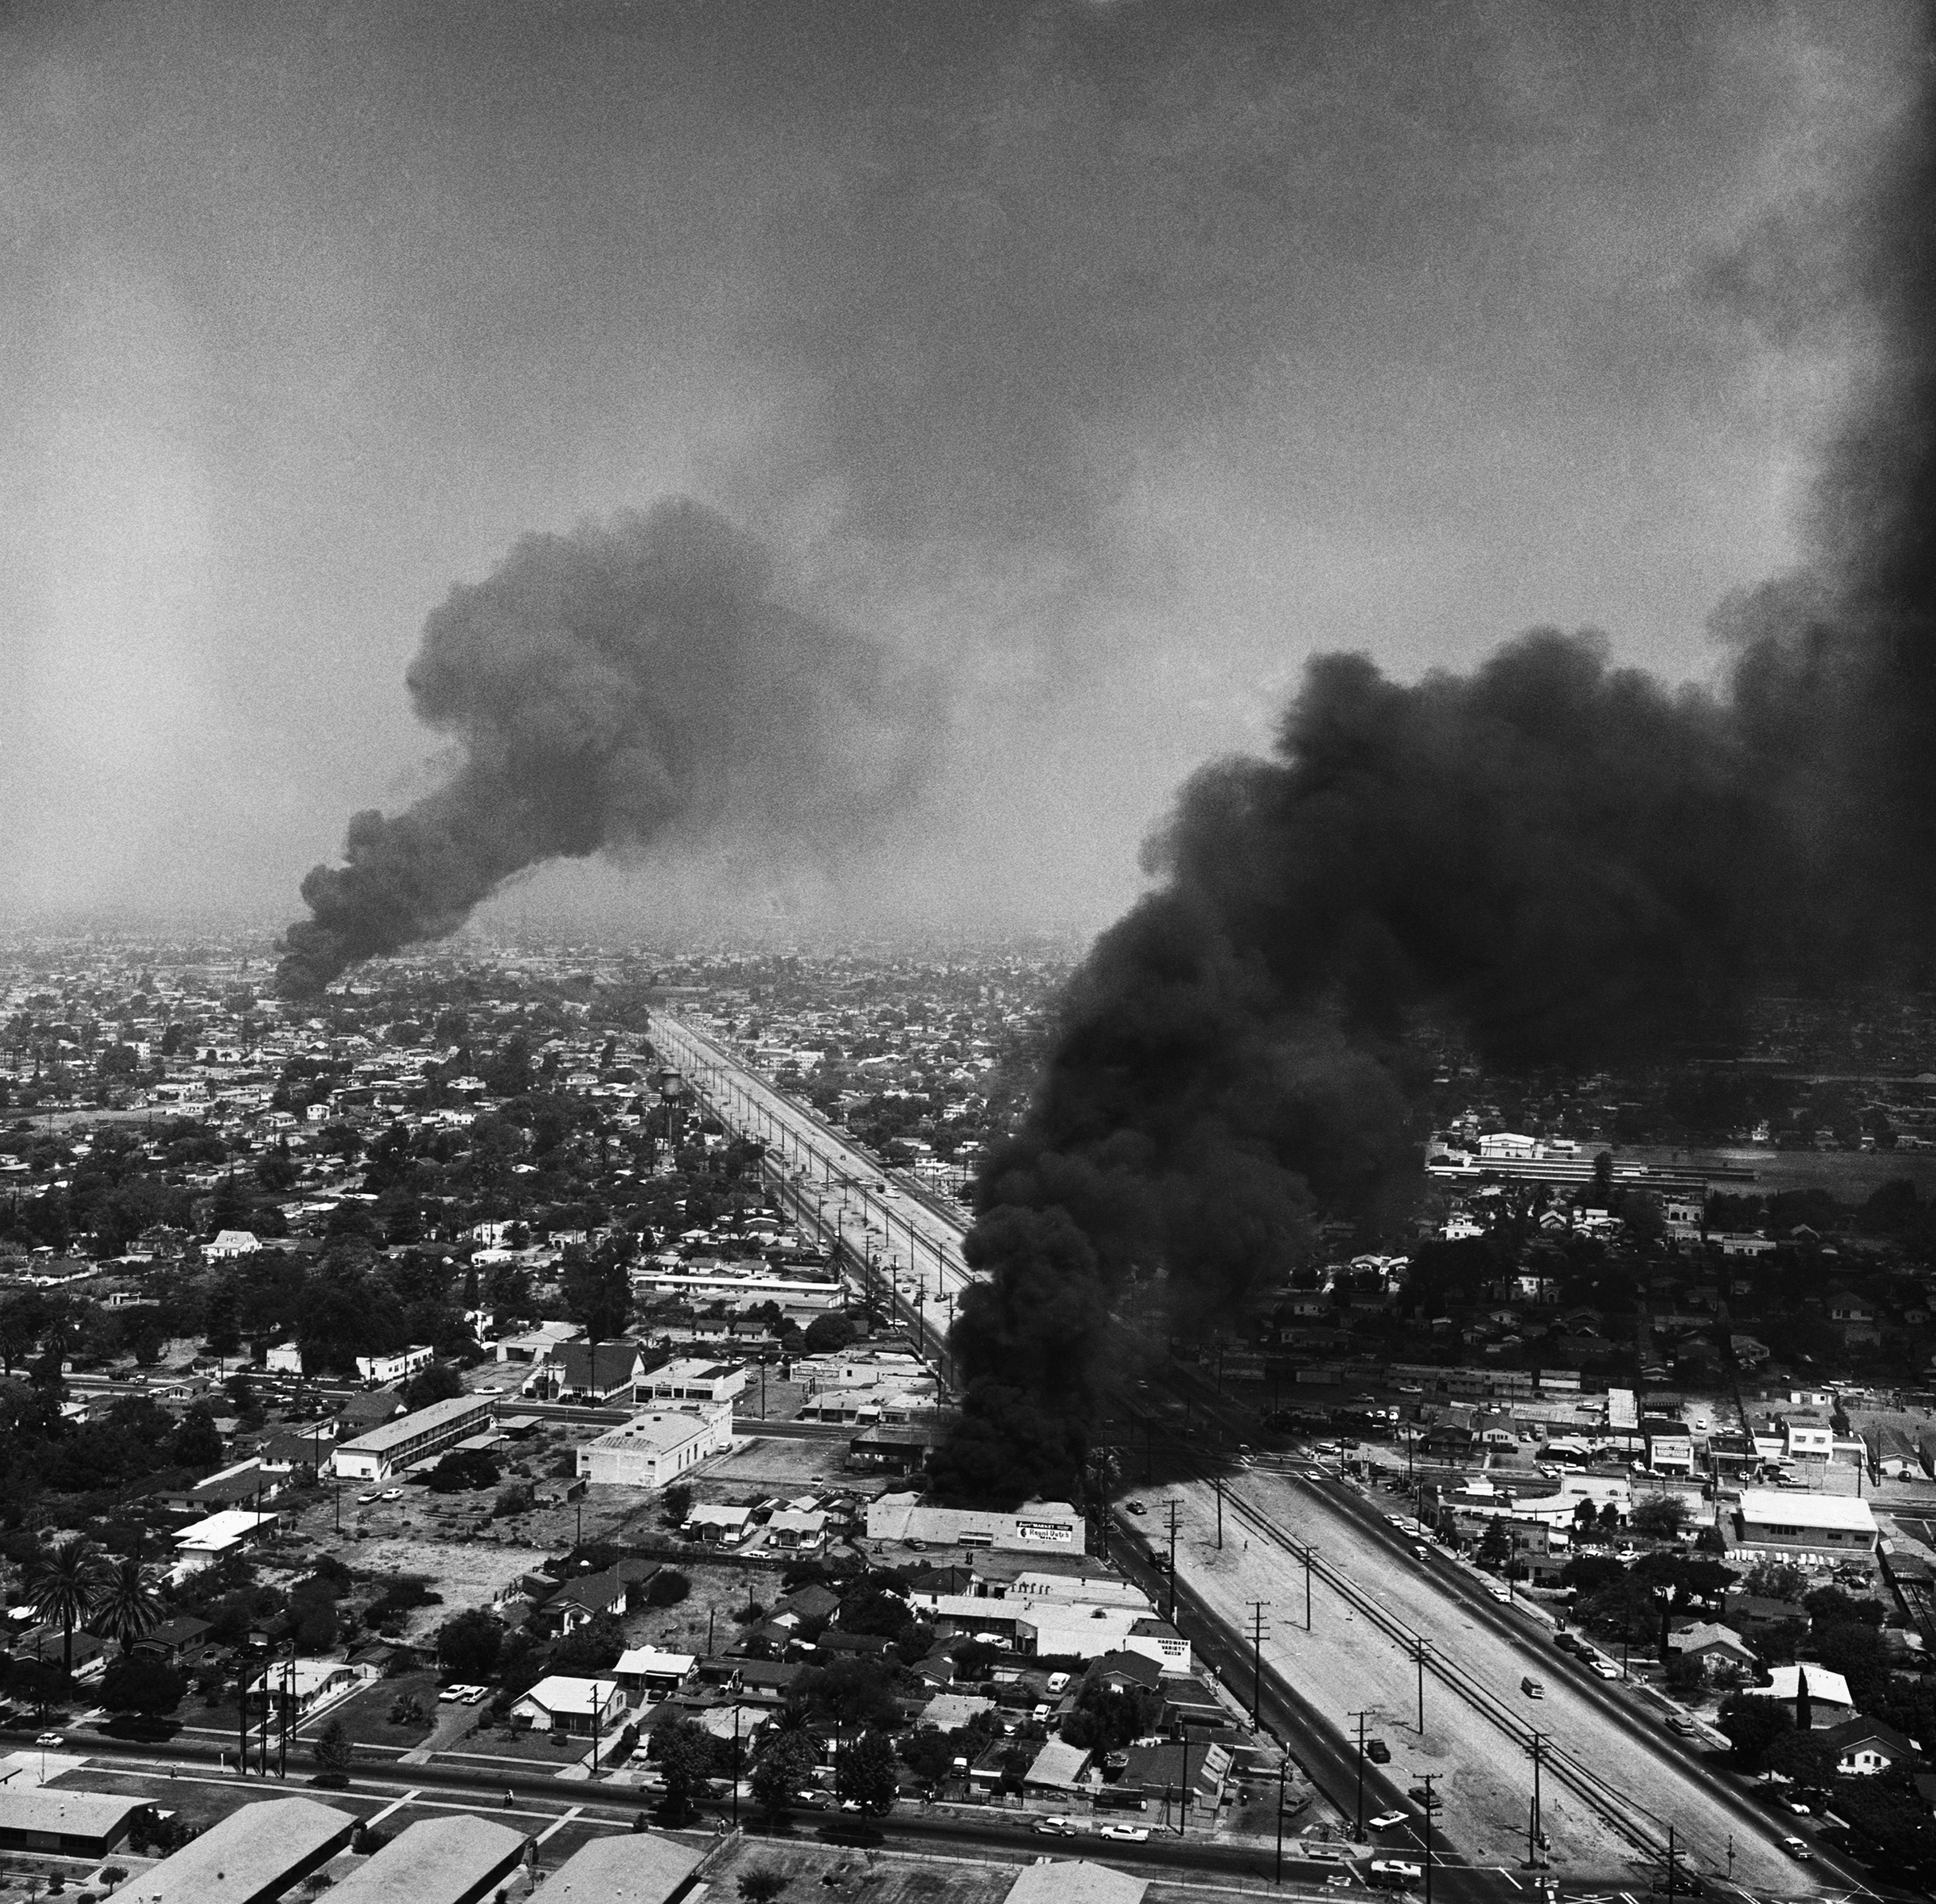 Black smoke darkens the sky over Southeast Los Angeles, during the fourth day of rioting in the area on Aug. 16, 1965 (Bettmann Archive/Getty Images)